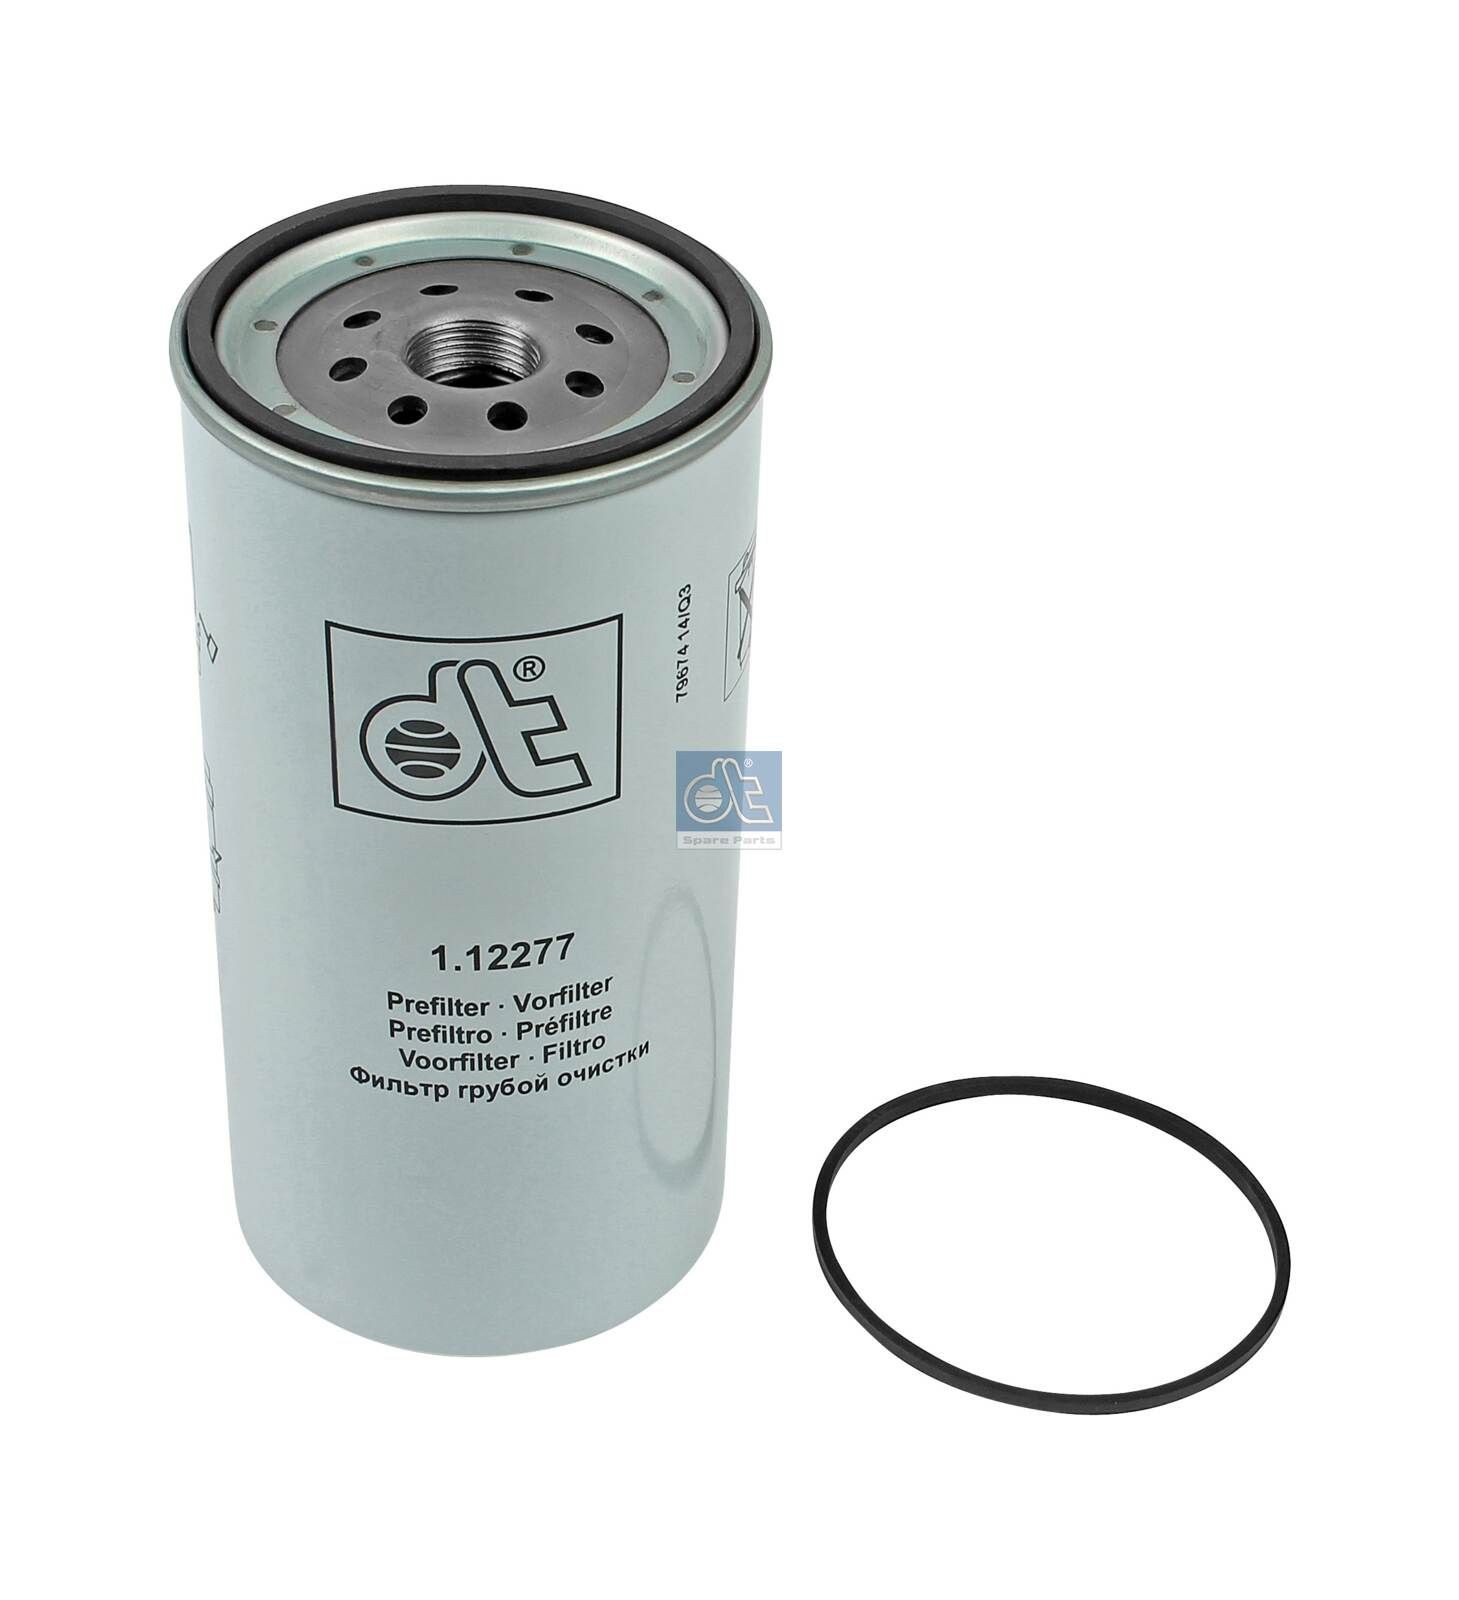 WK 1080/6 x DT Spare Parts 1.12277 Fuel filter 74 20 754 418